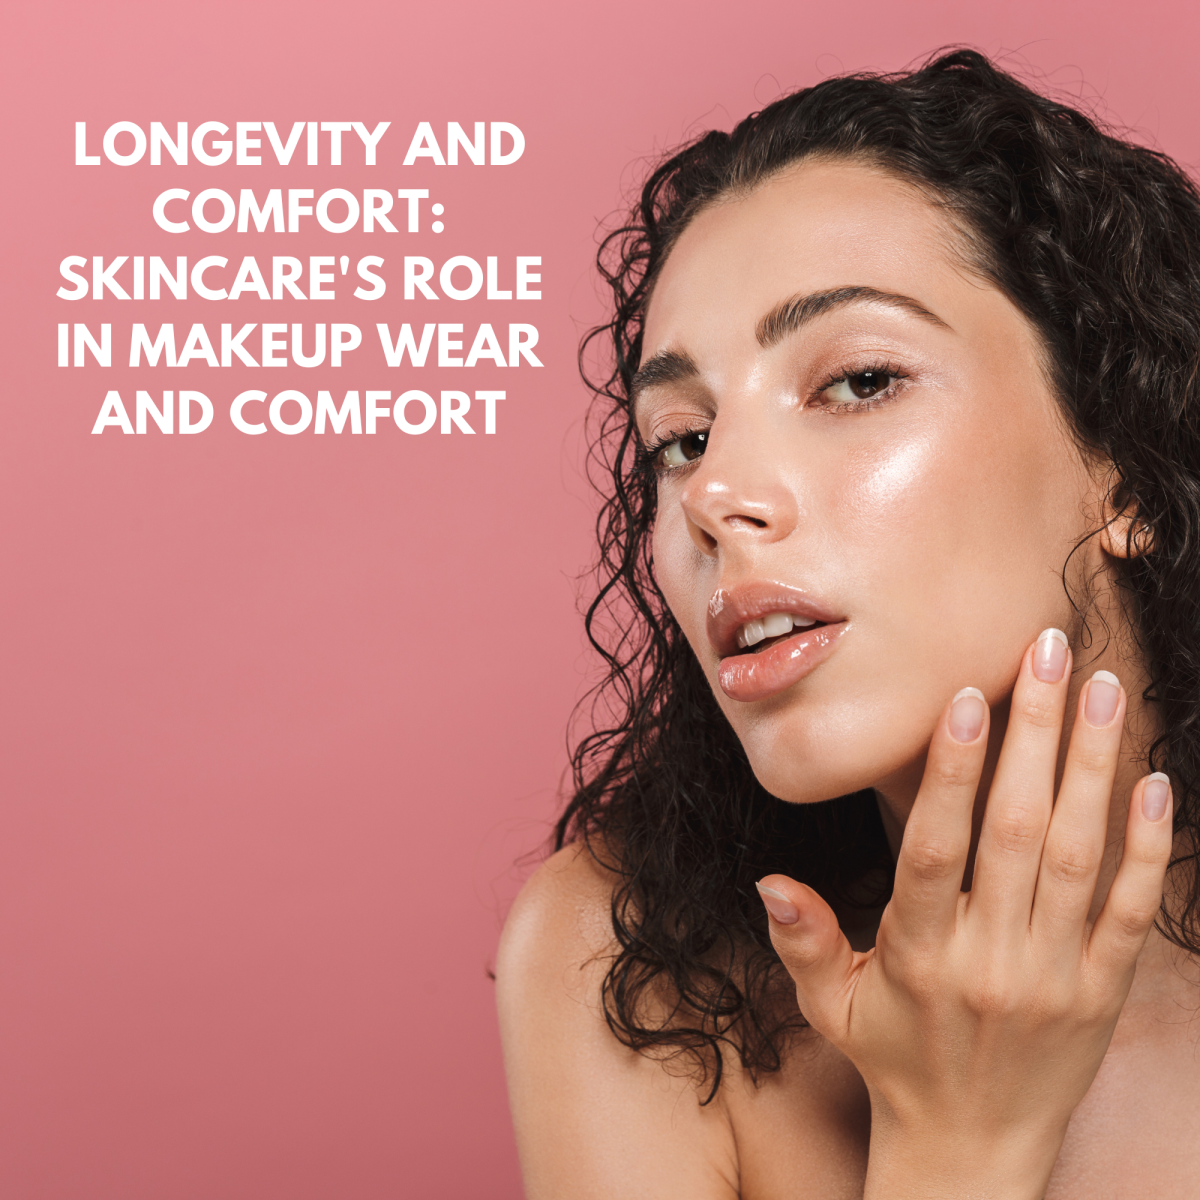 Longevity and Comfort: Skincare's Role in Makeup Wear and Comfort